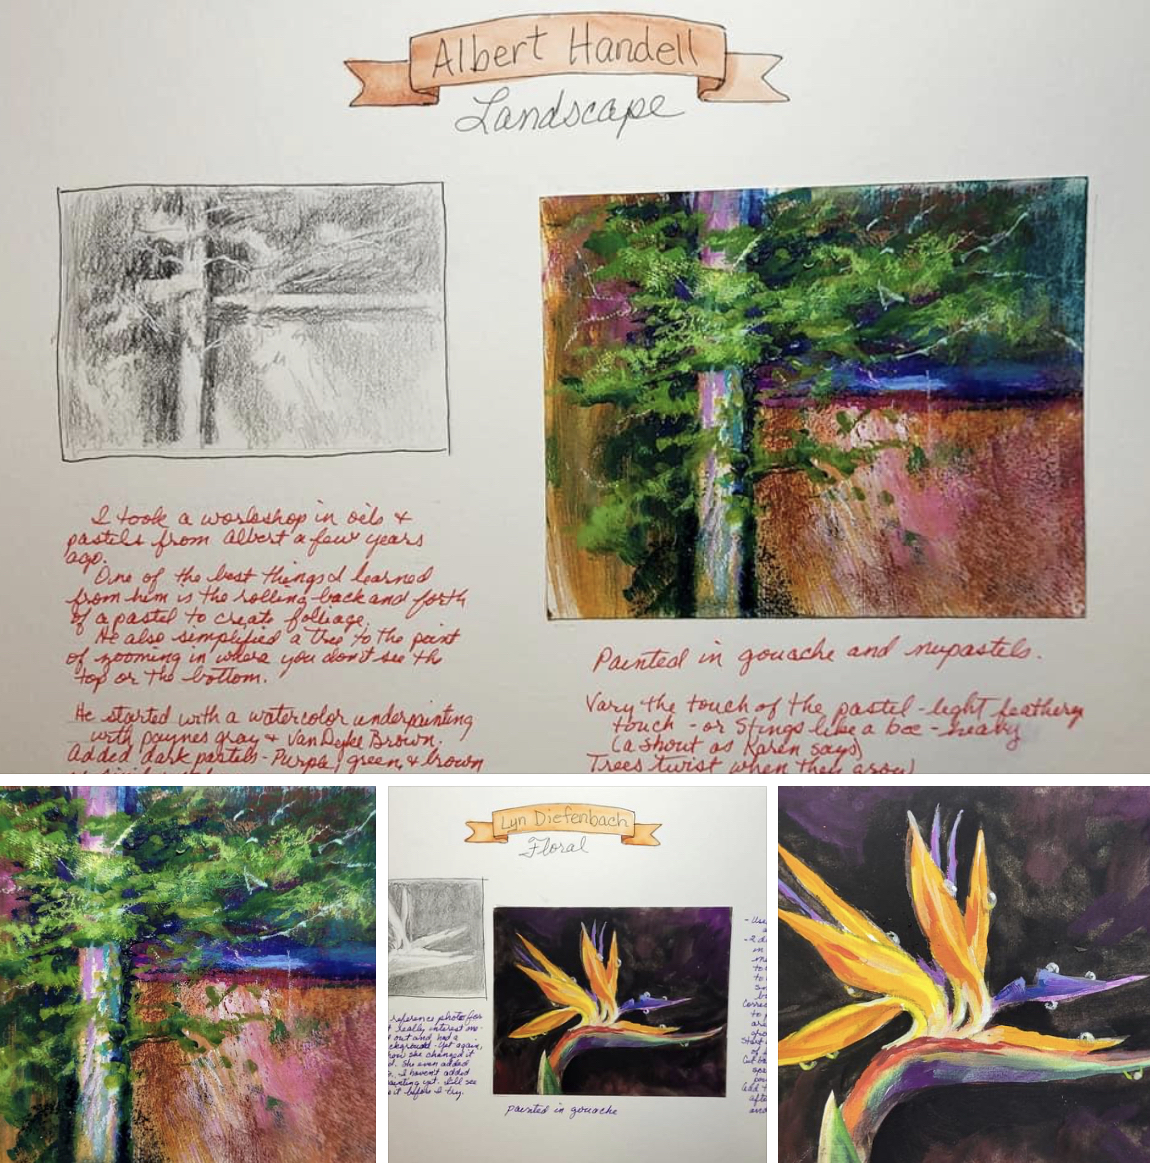 Kari McCall Waltz shares her notes and paintings from sessions by Albert Handell and Lyn Diefenbach.